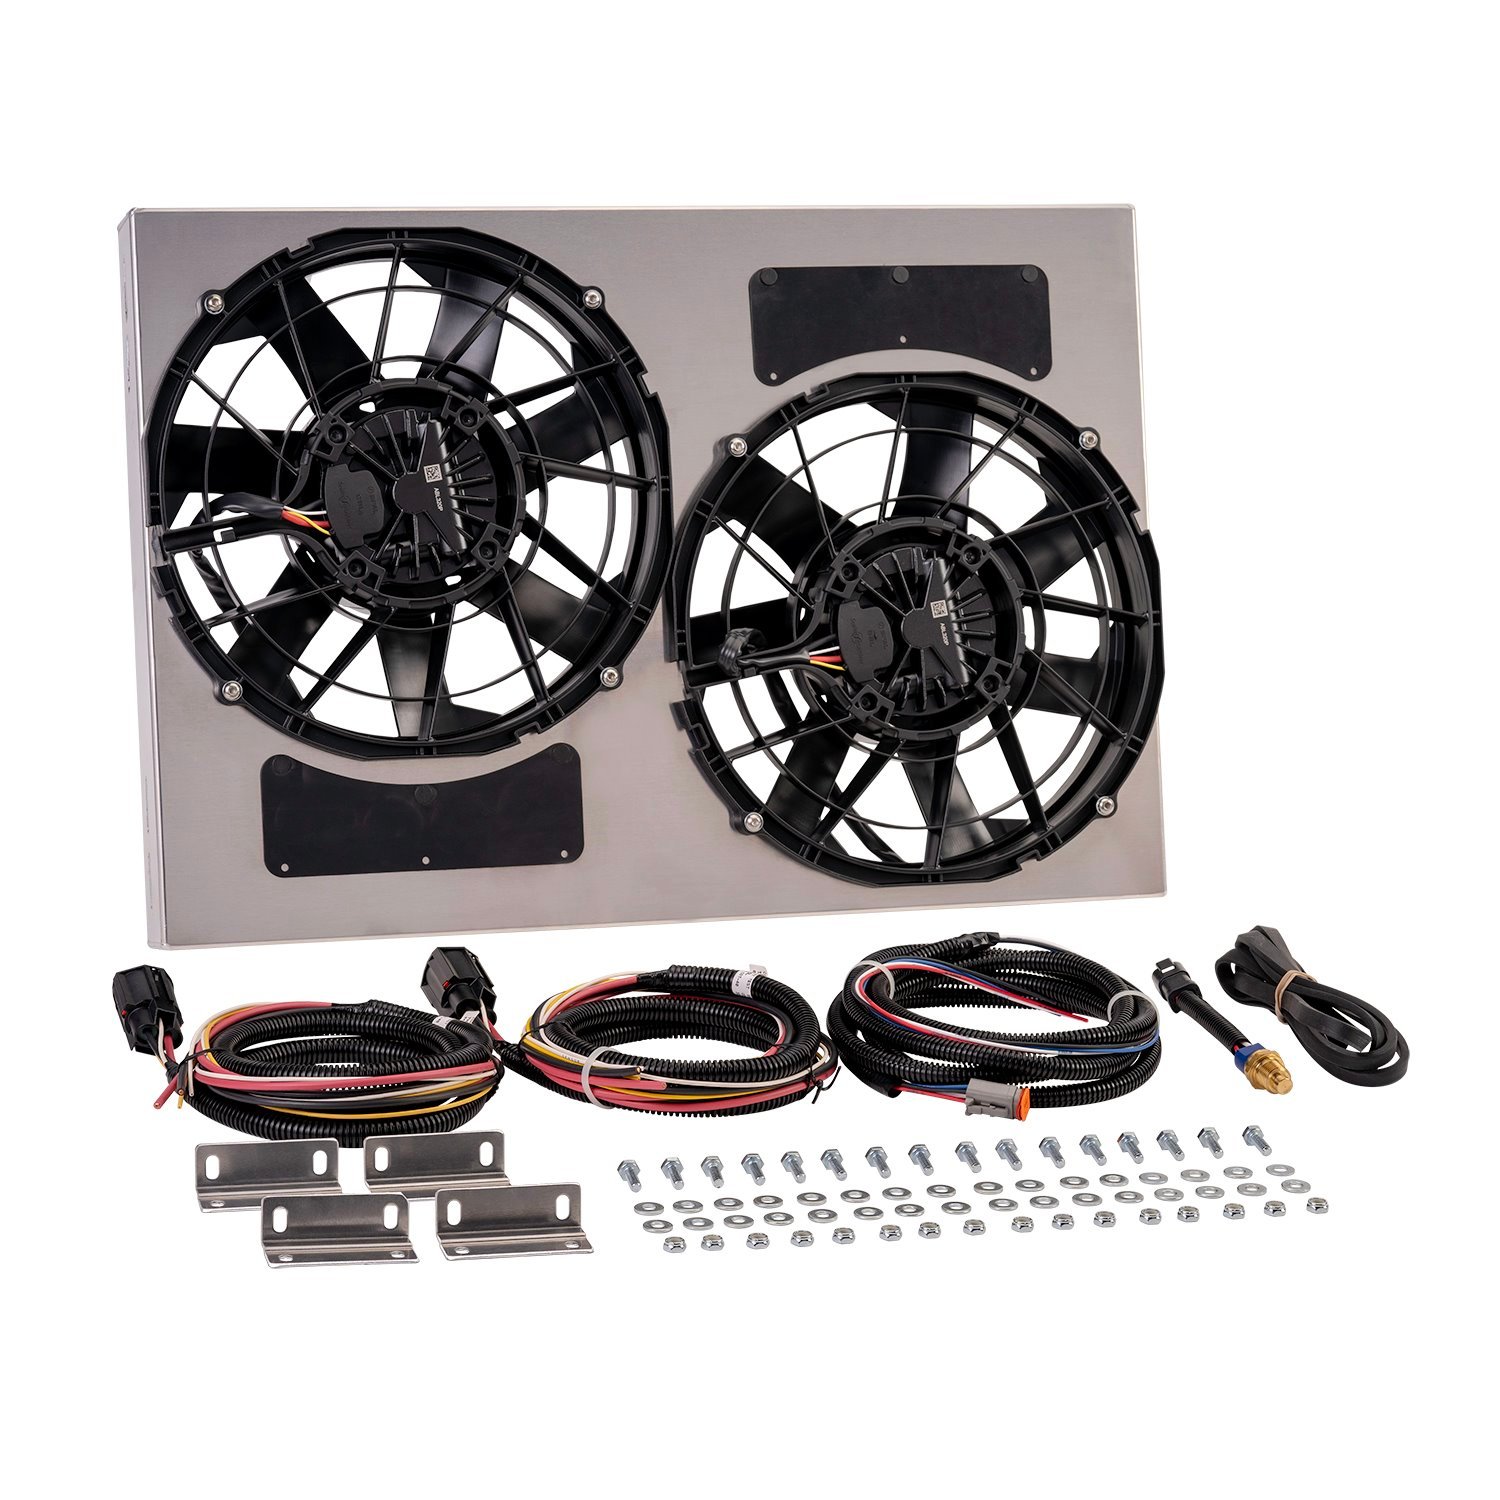 67942-185 Brushless Dual Powerpack 12 in. Radiator Fan Assembly with Integrated 185 Degree PWM Controller